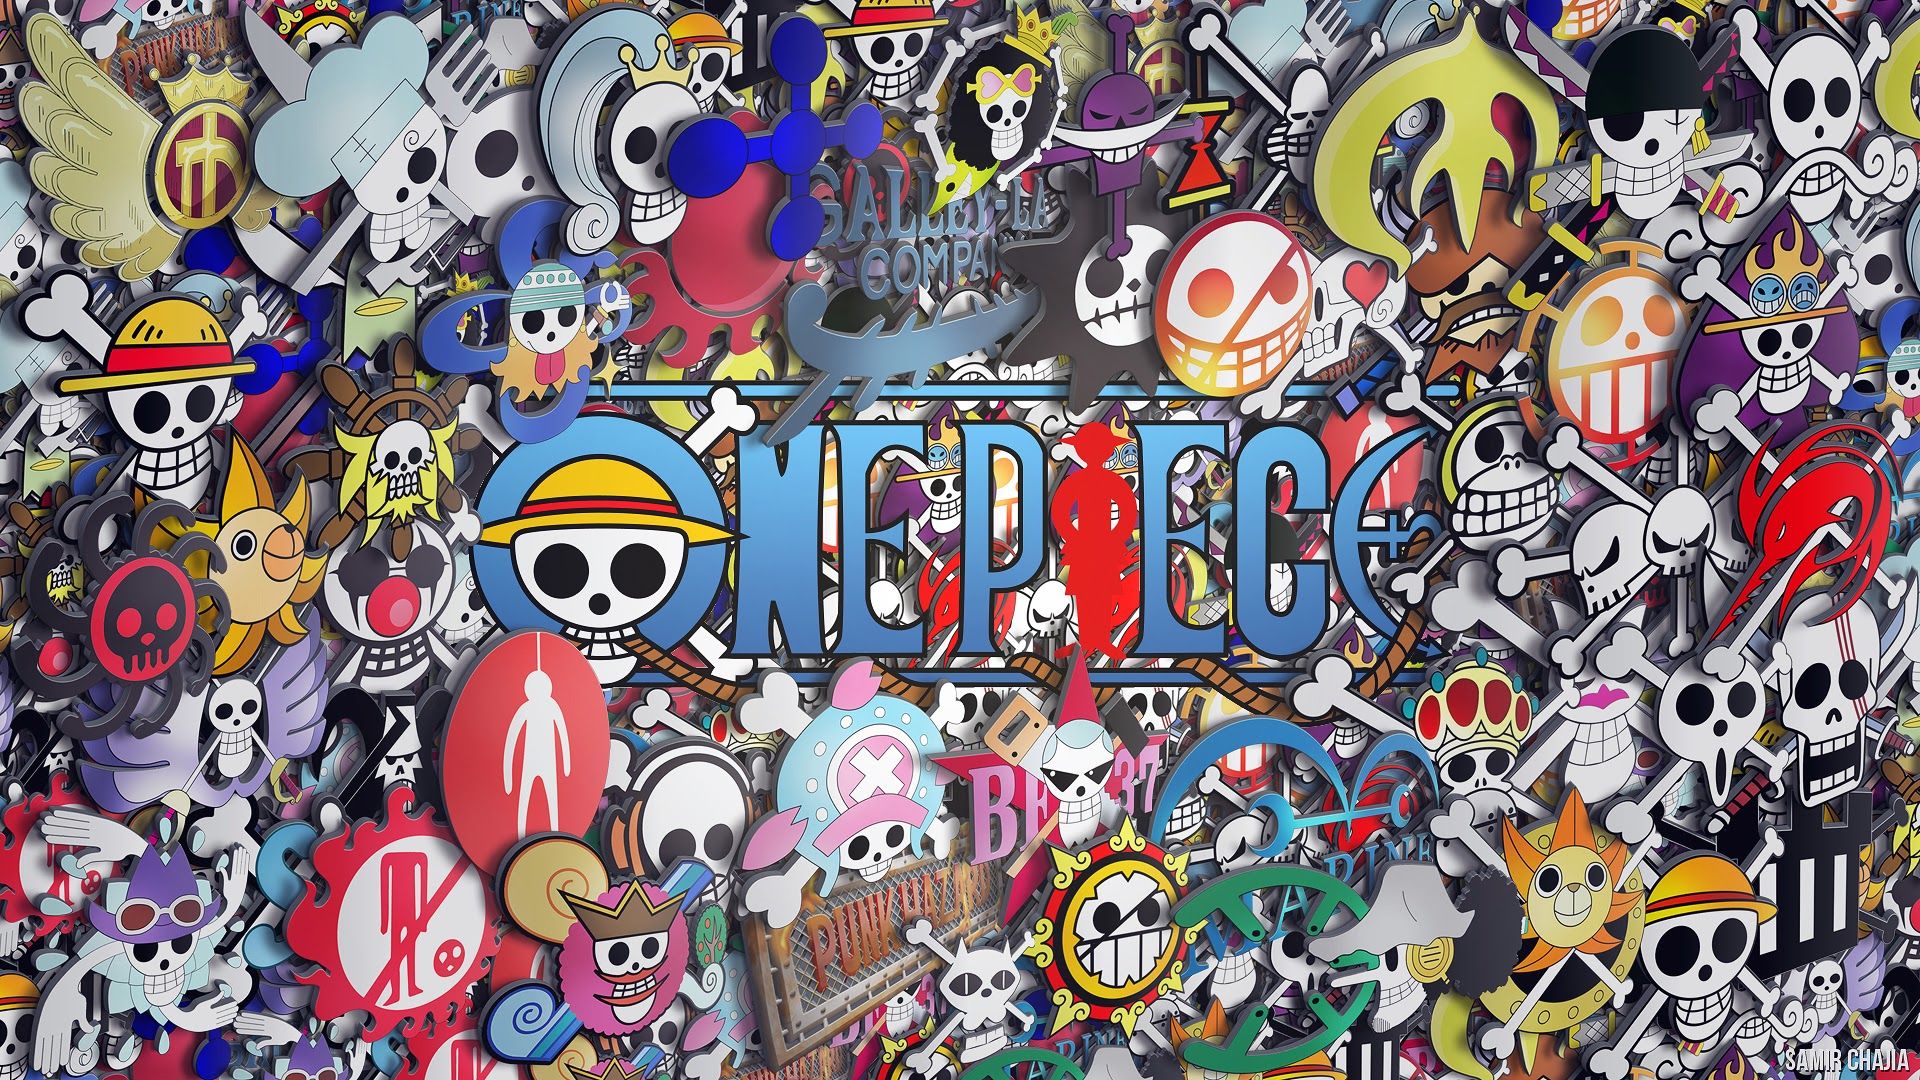 Free download One Piece Crew Image Background HD Wallpaper One